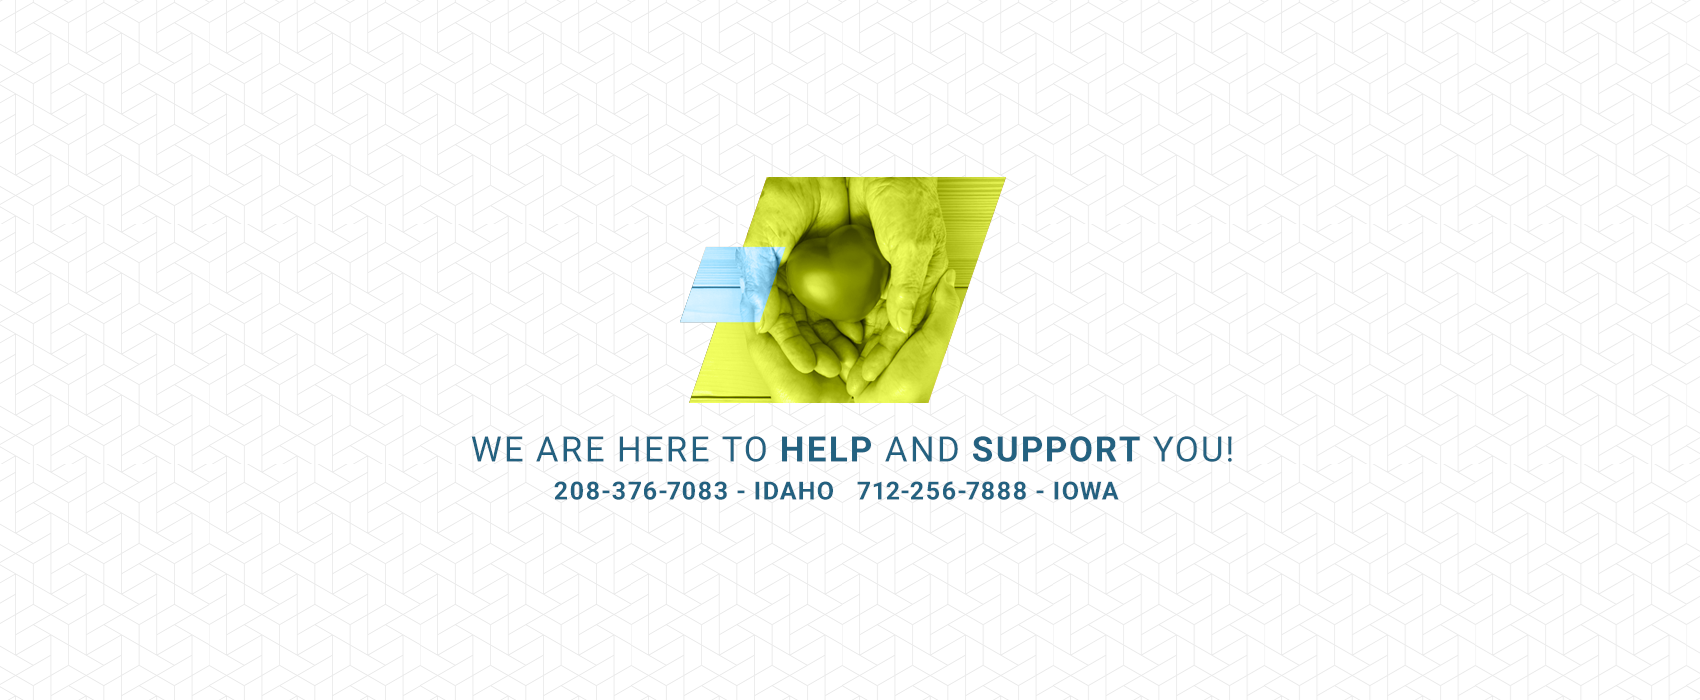 We are here to help and support you!